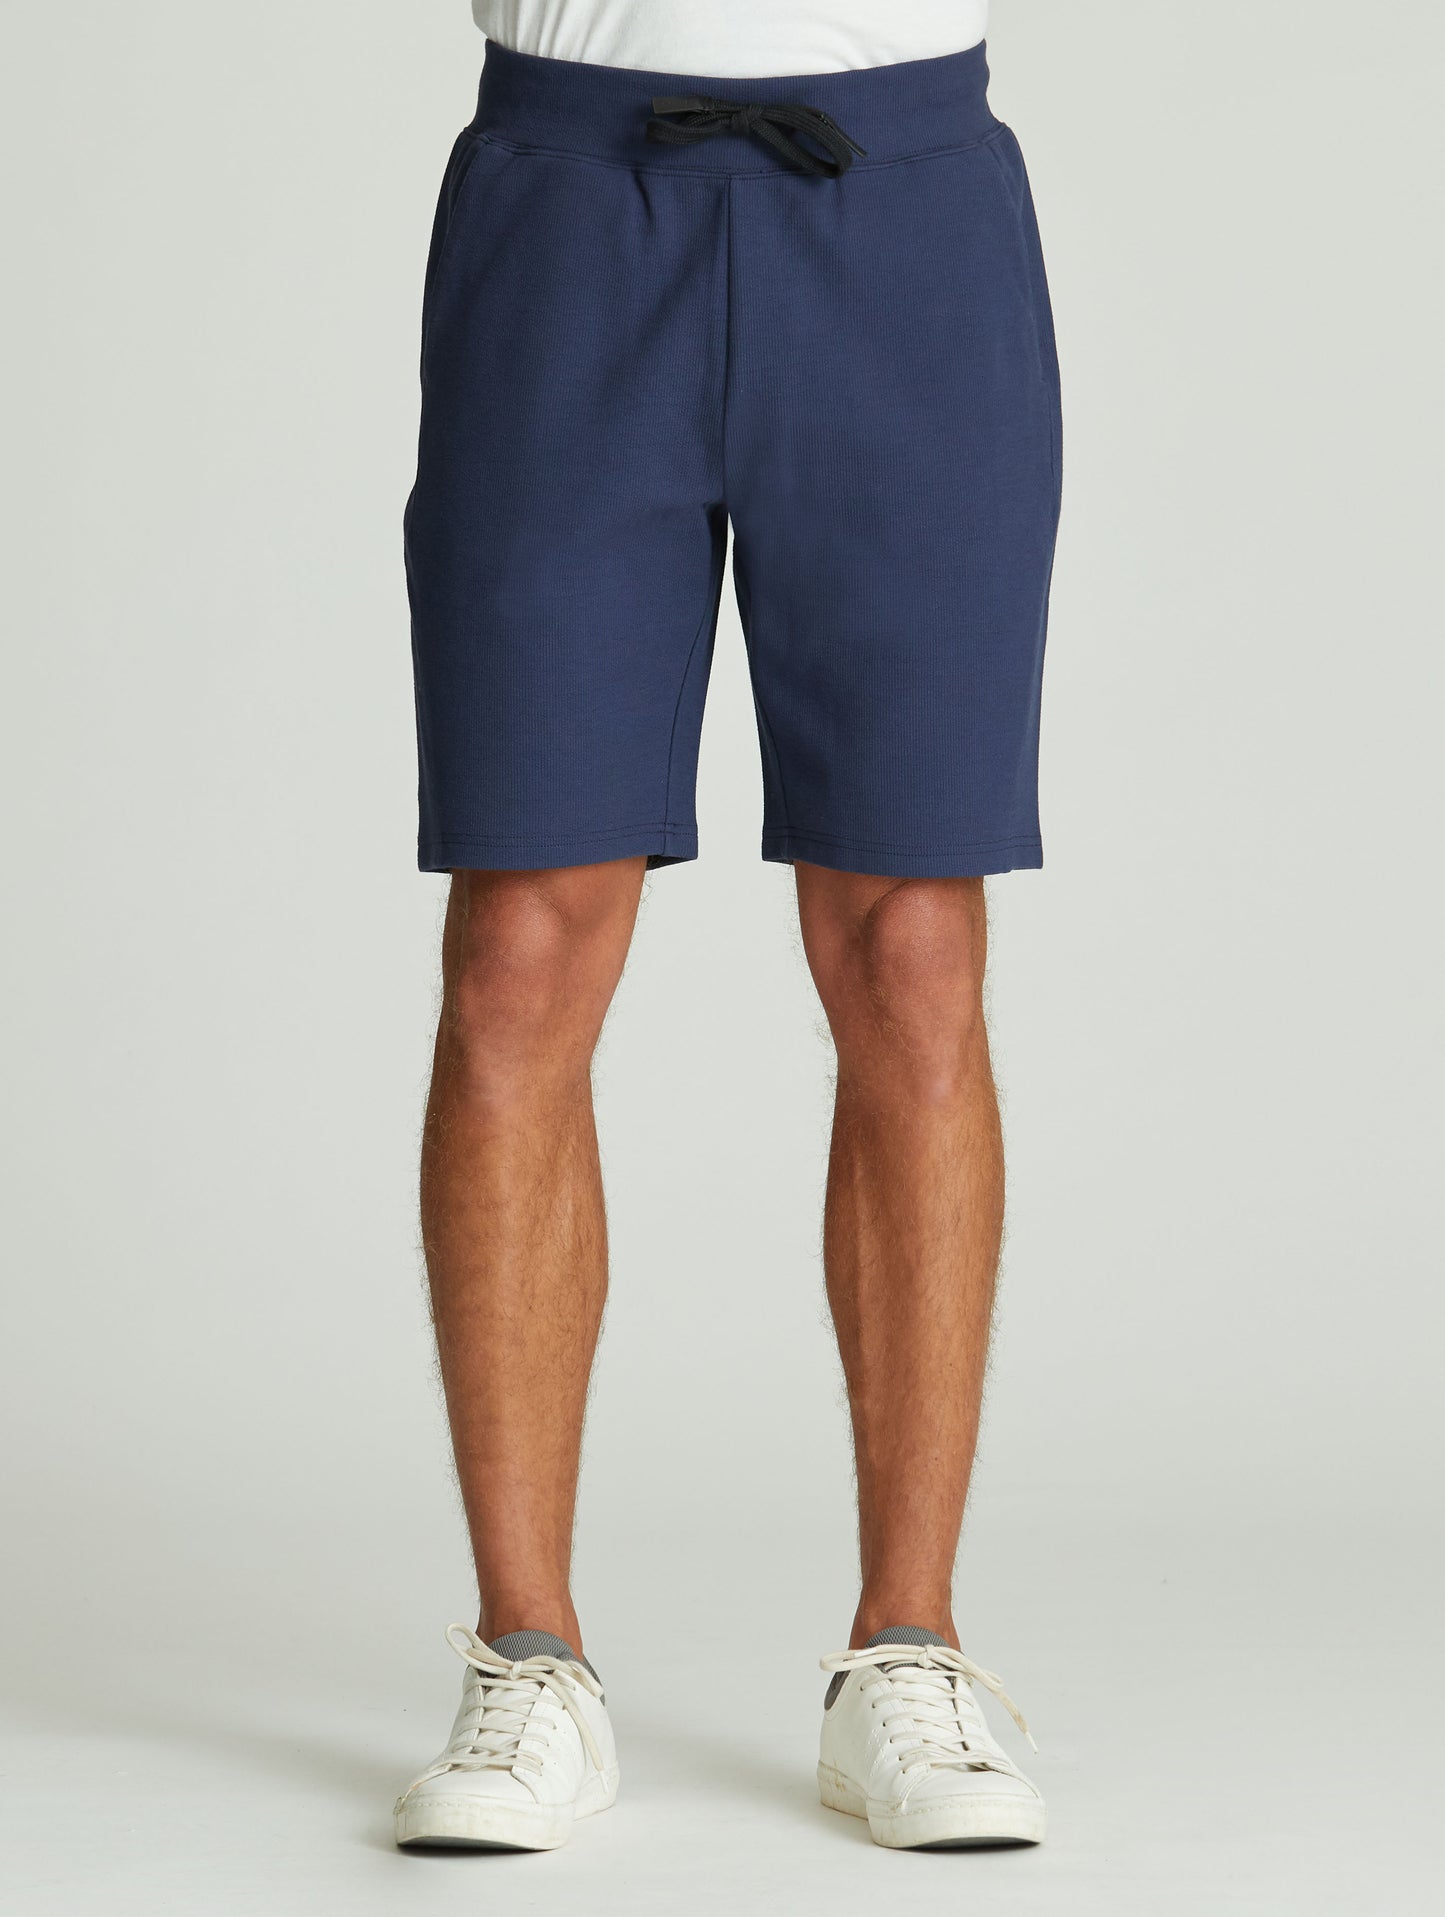 shorts for men from Aether Apparel